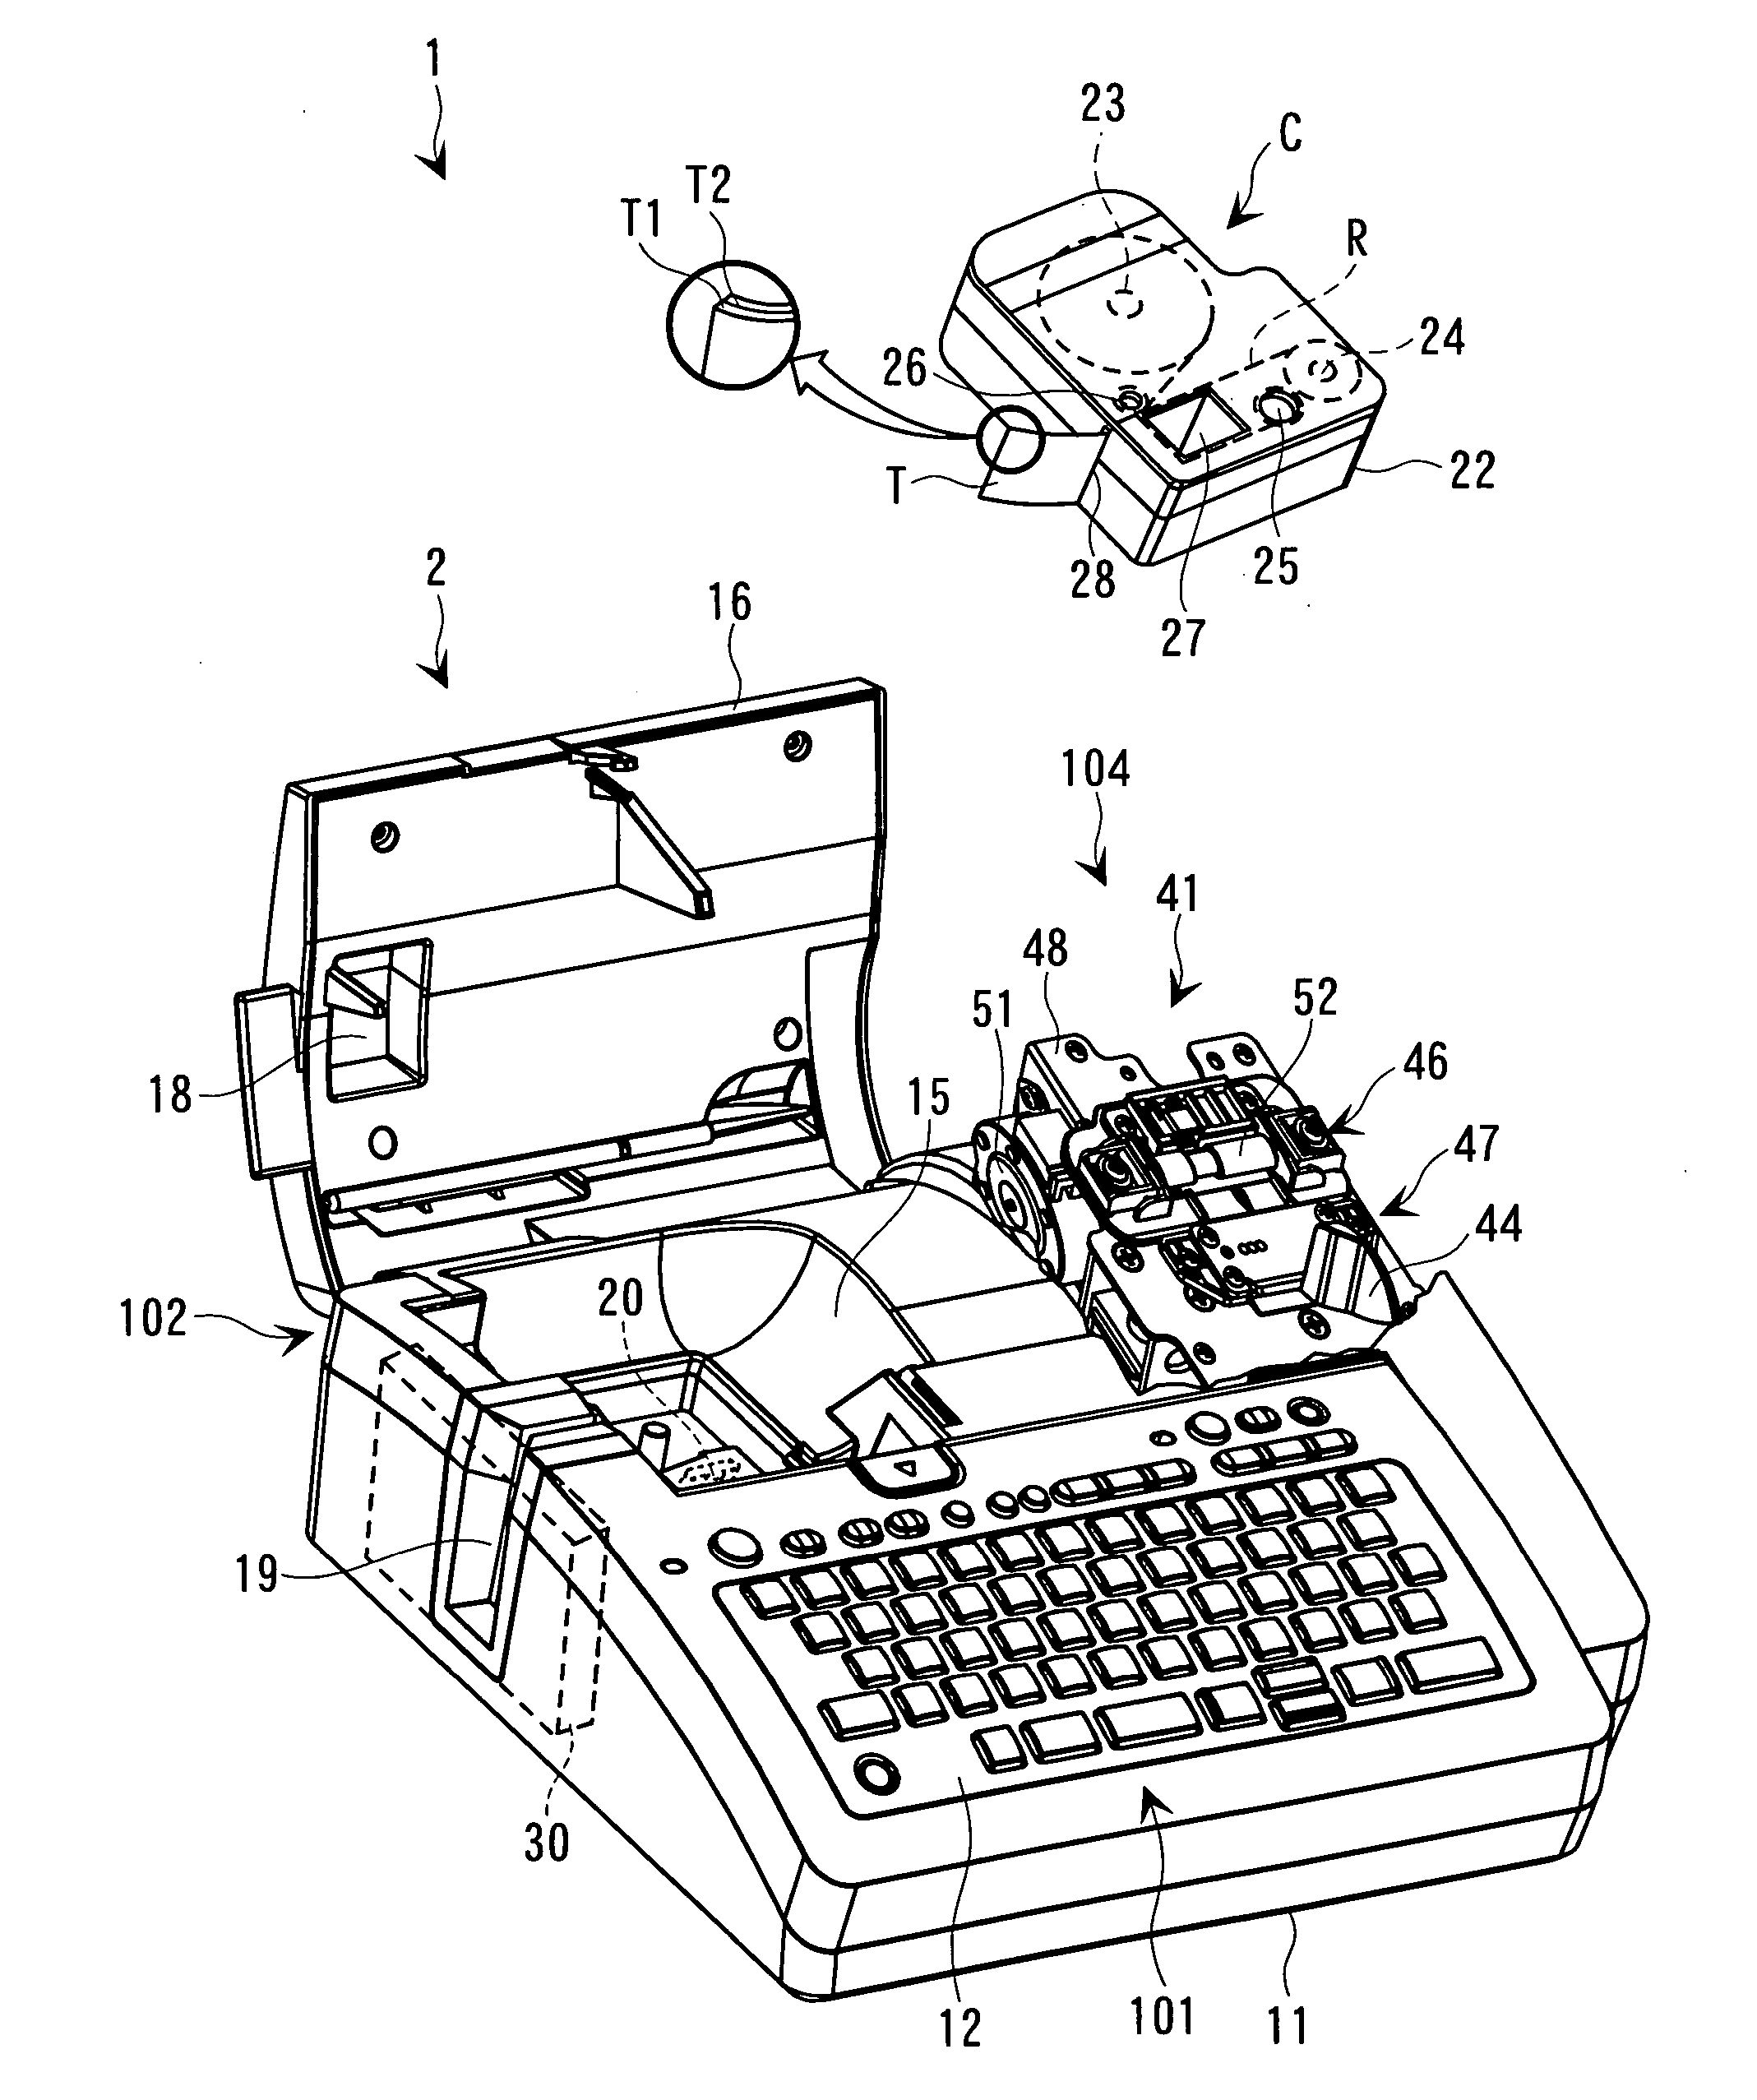 Method of forming label with label forming apparatus, and label forming apparatus